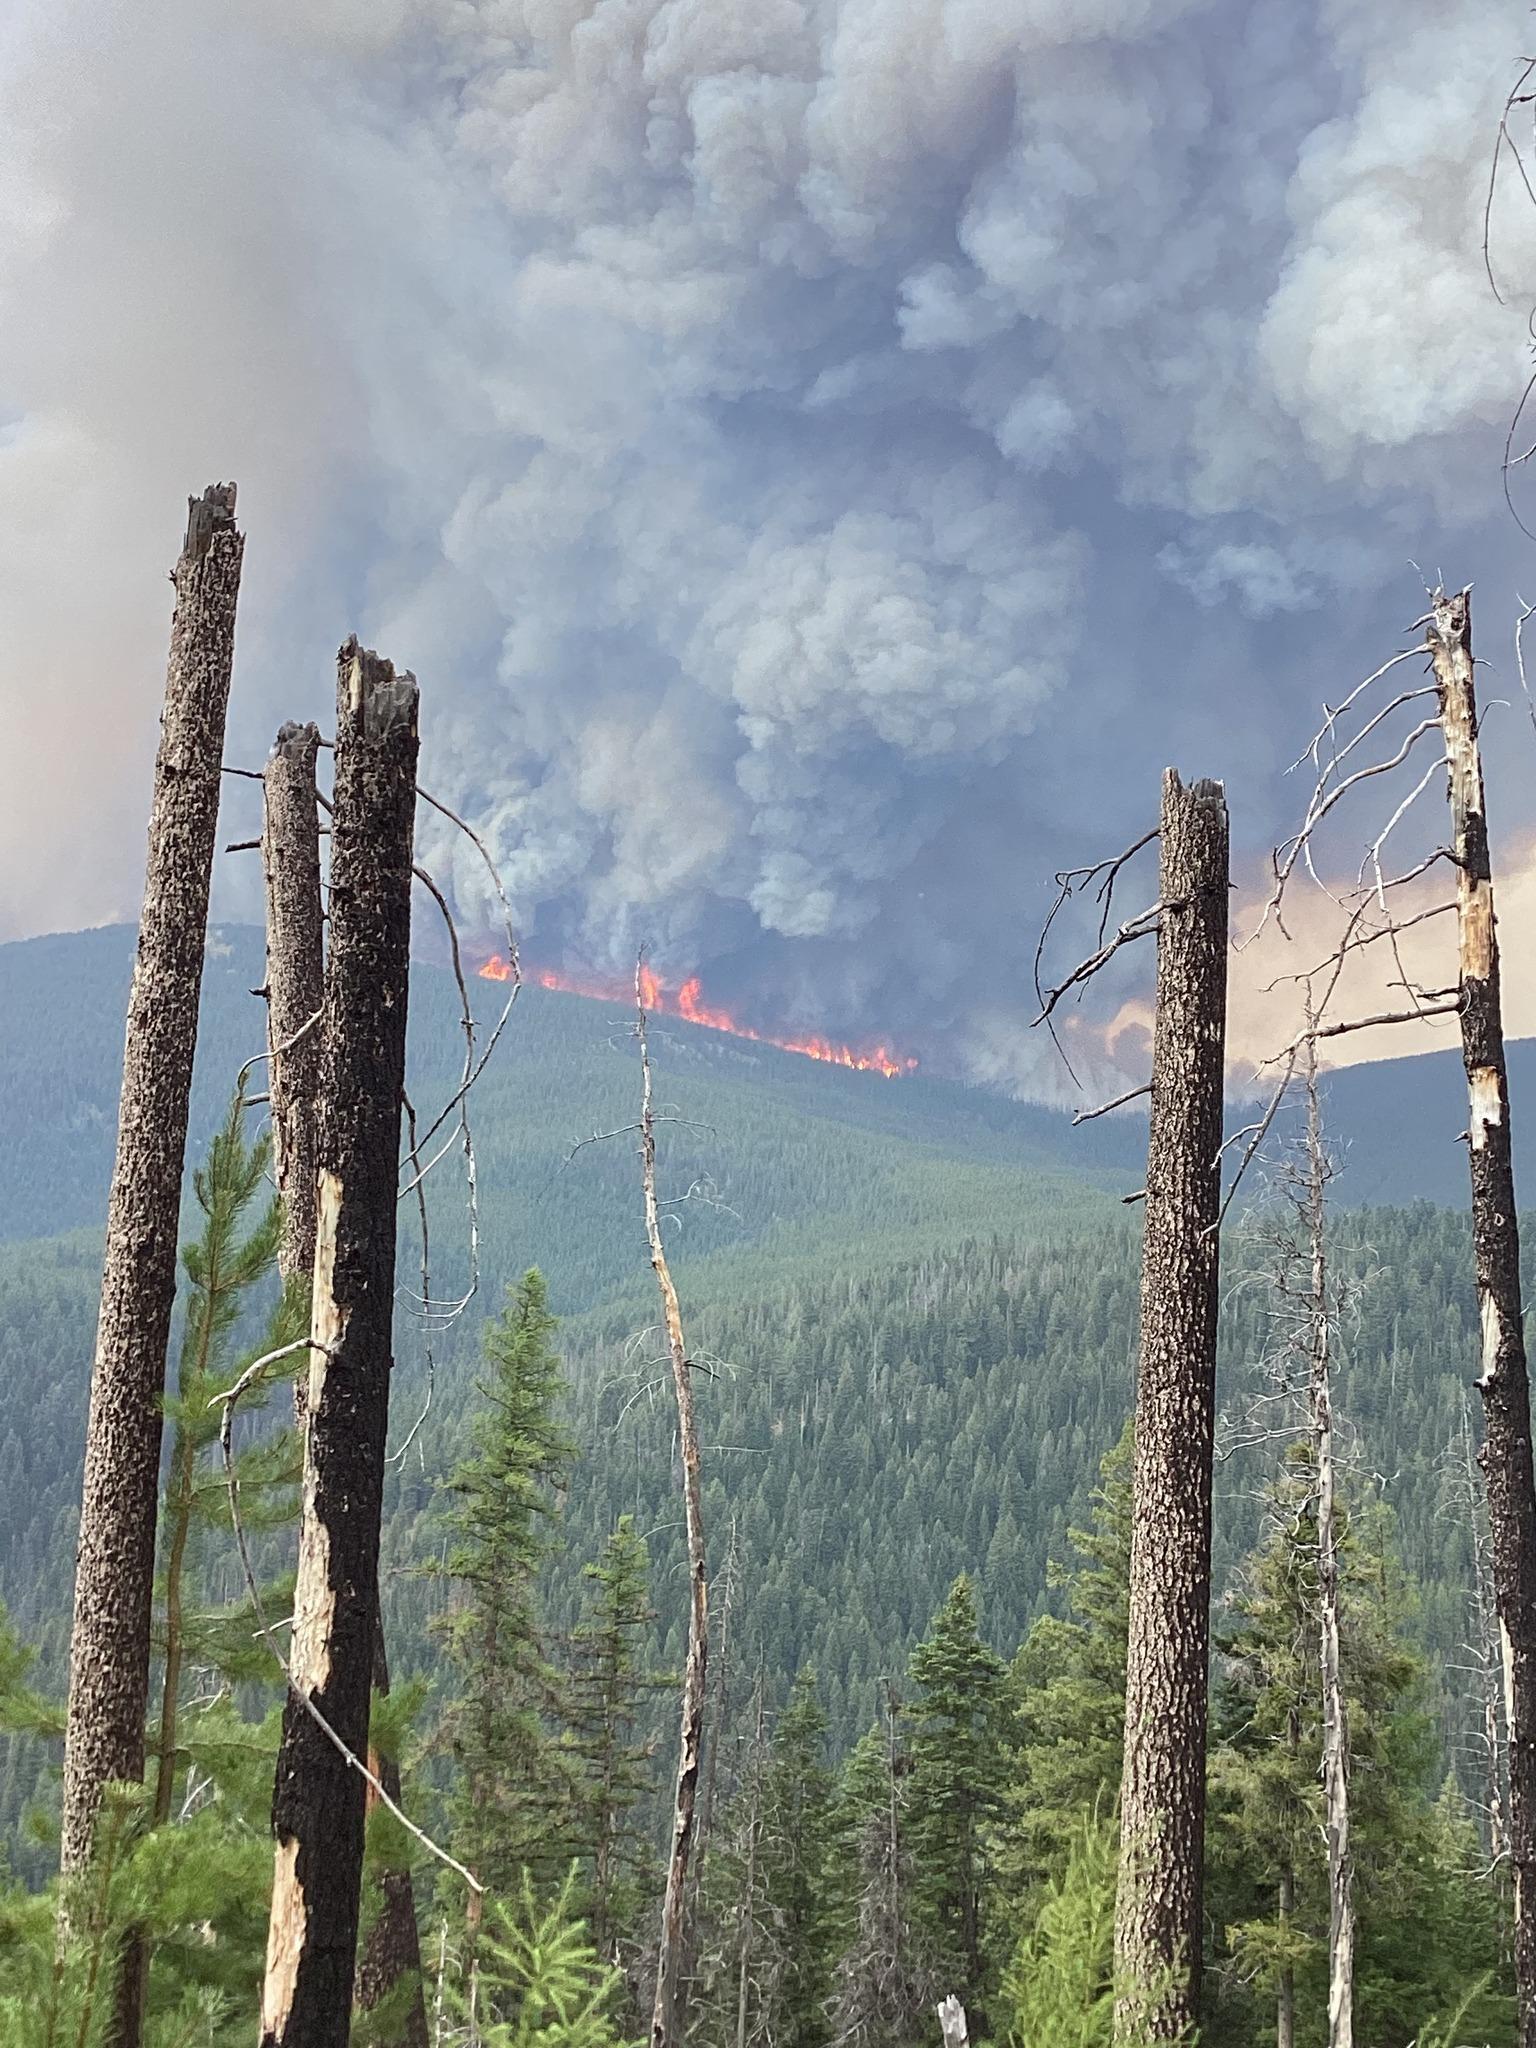 Wildfire flames can be seen among smoke on a ridgetop in the distance, as seen through burnt pine trees in the foreground